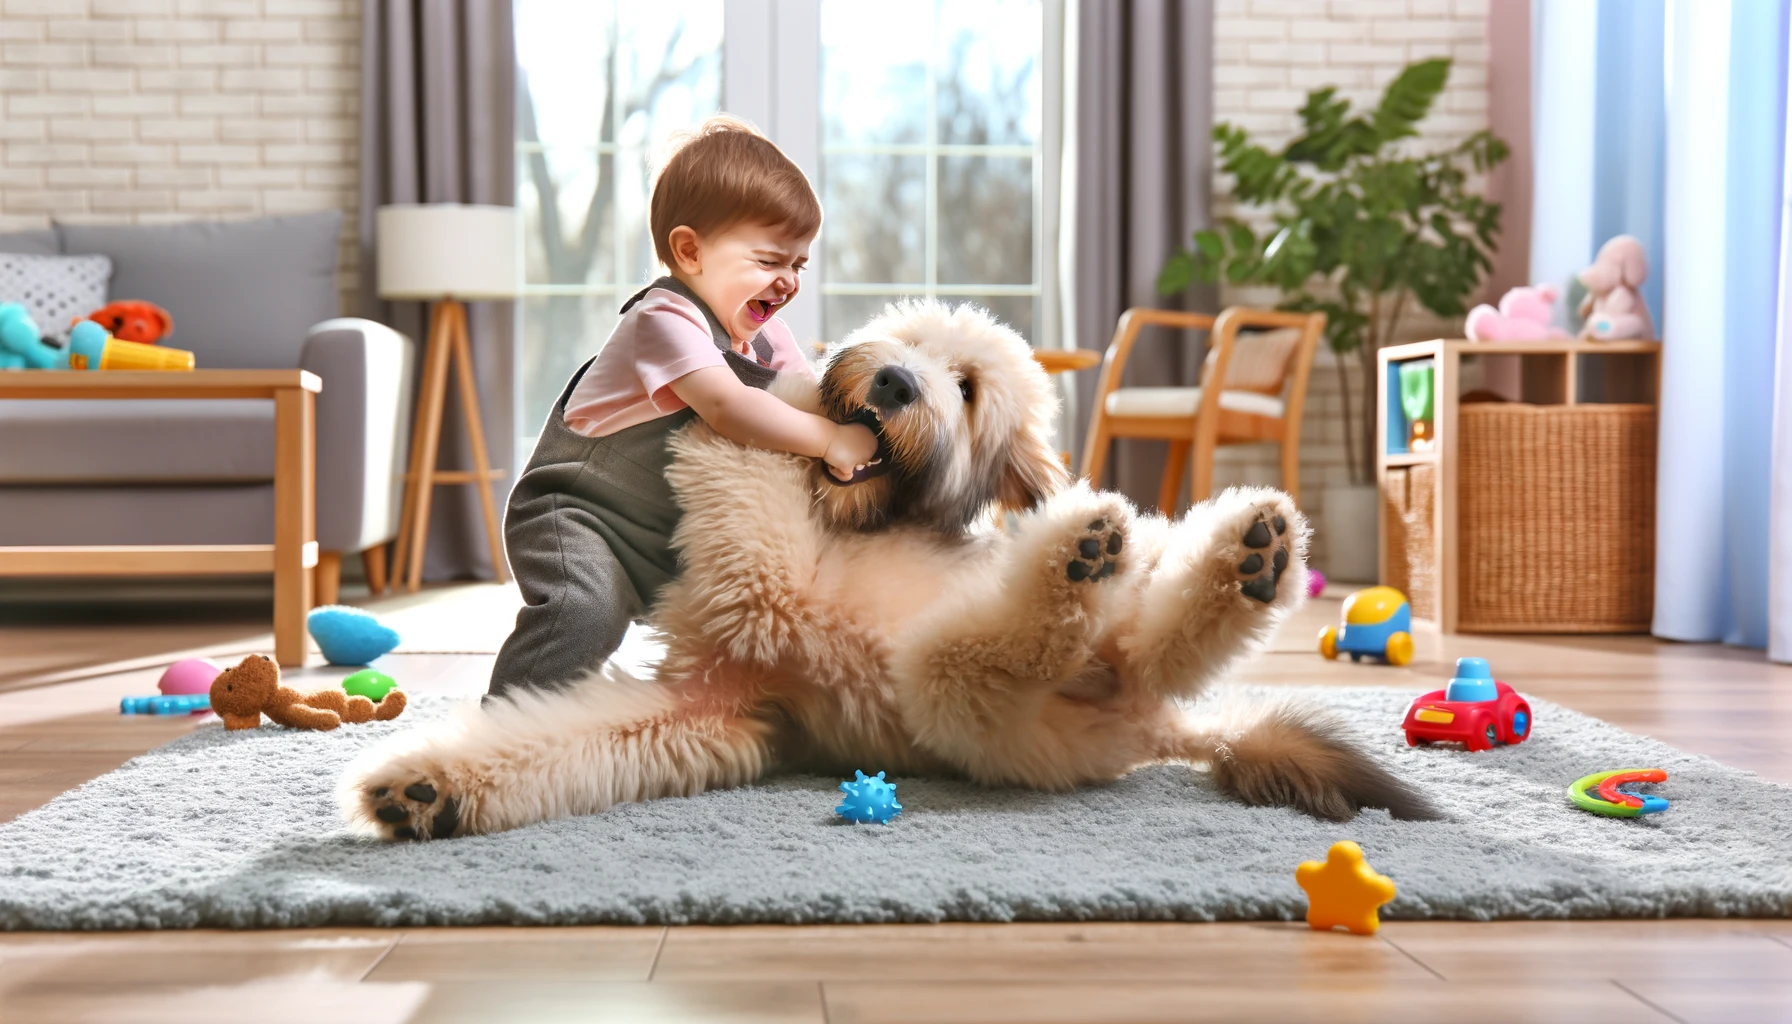 child wrestling with a large, fluffy dog